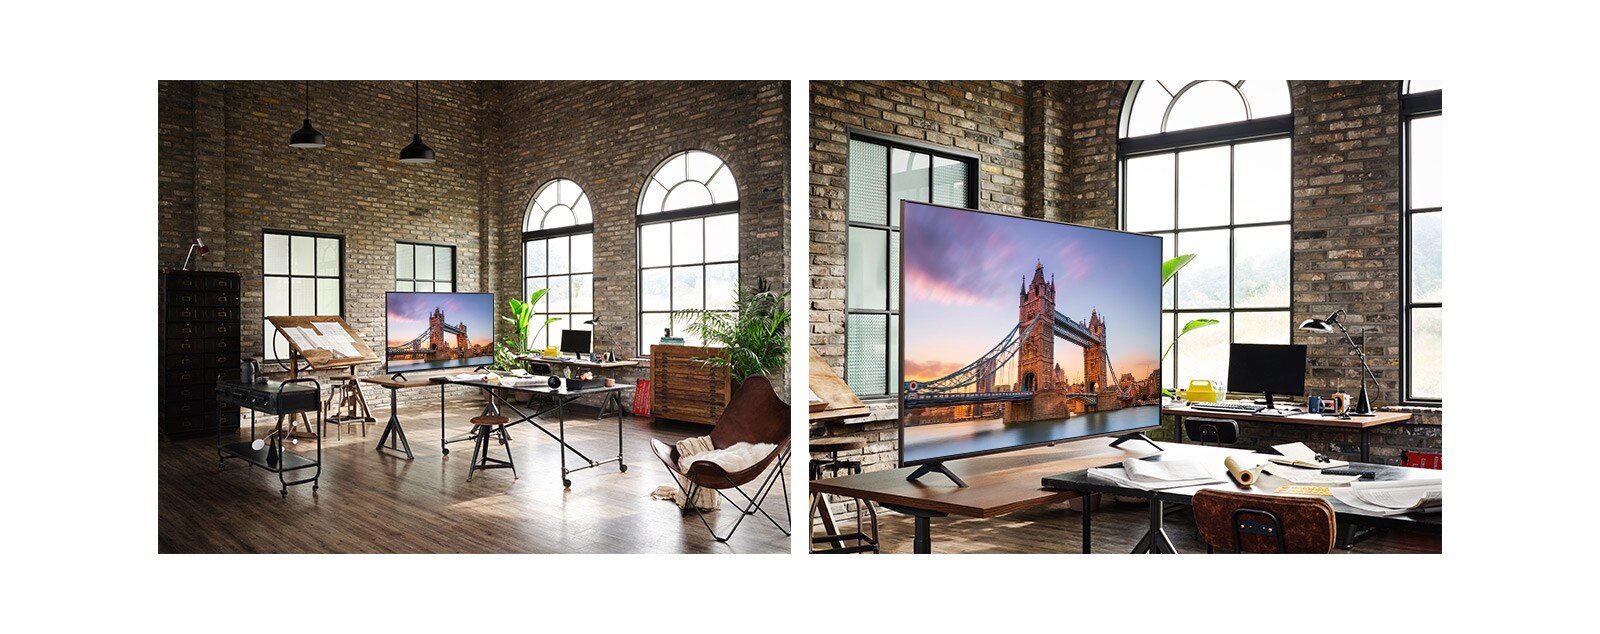 A TV displaying a picture of London Bridge is in an antique workroom. A TV displaying a picture of London Bridge is in an antique workroom.